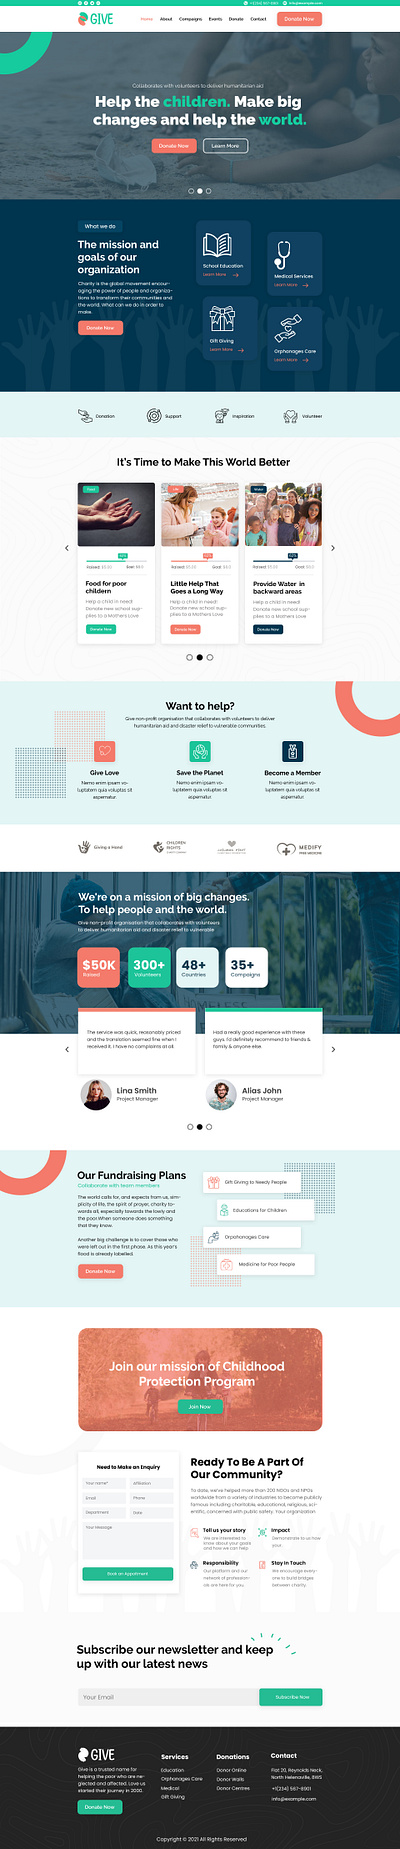 Humanity Care - Nonprofit Charity & Donation Elementor Template branding charity church design design idea donate donation foundation fundraising funds graphic design ngo organization orphanage religious ui ux website